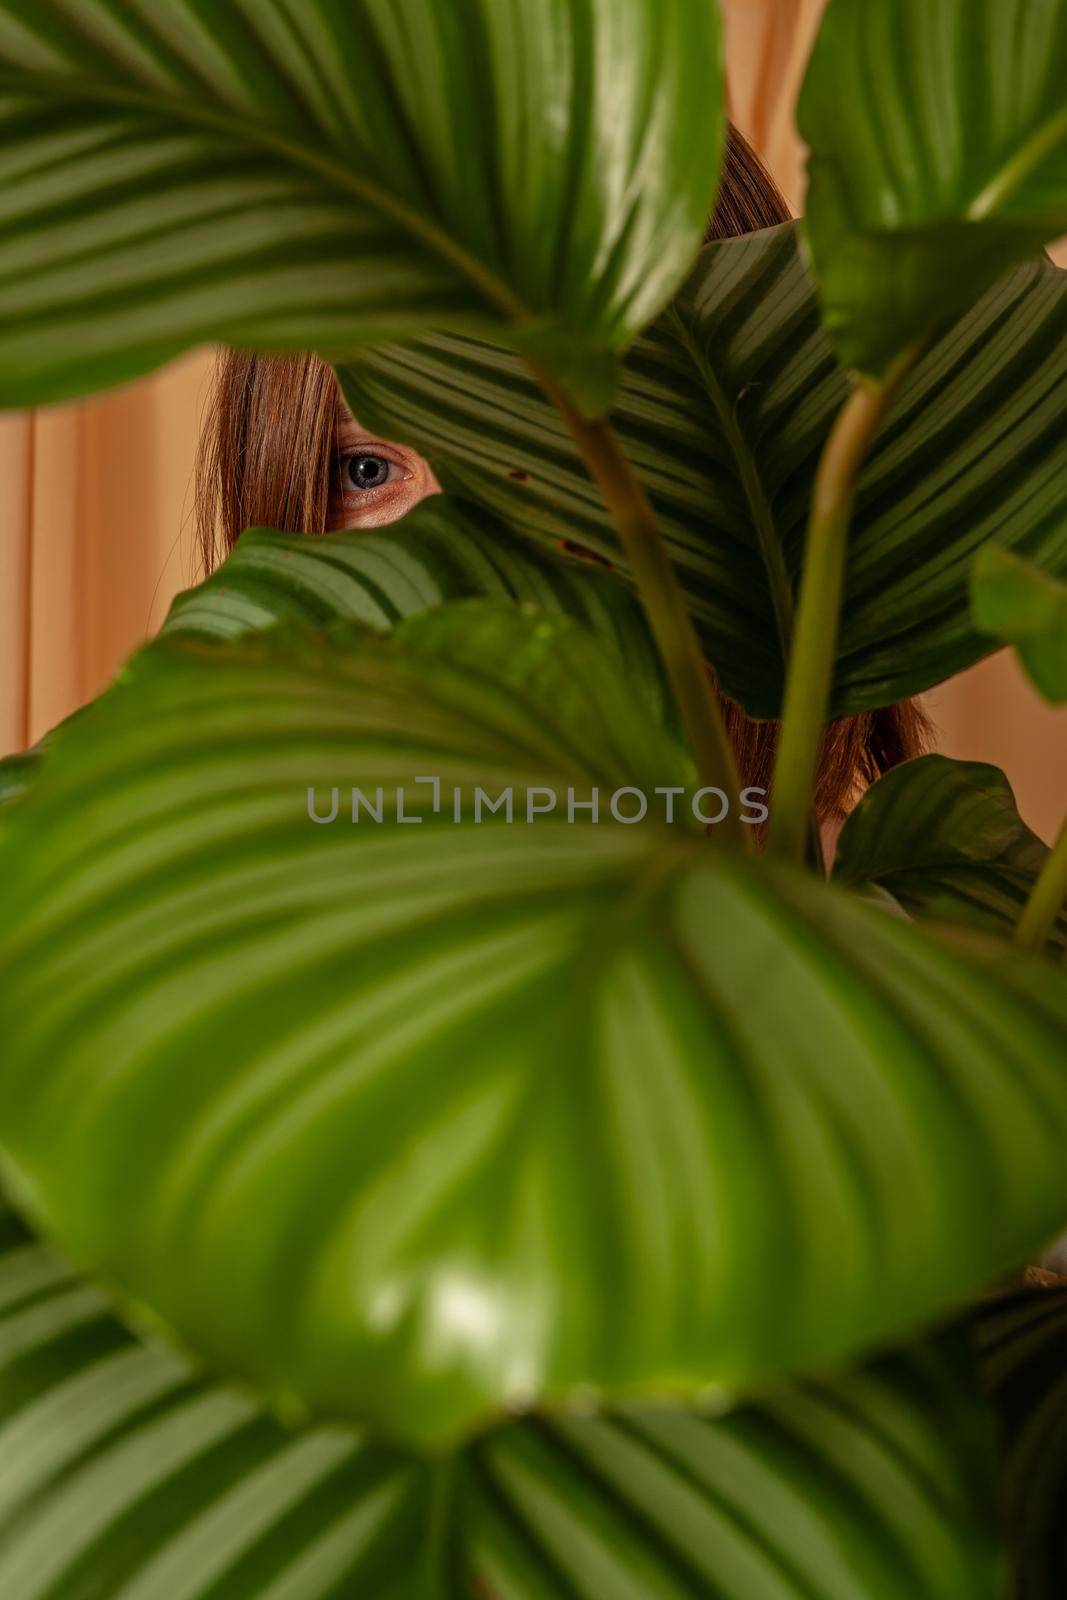 Woman looks through the leaves of the Calathea orbifolia tropical plant on a fabric curtains background.